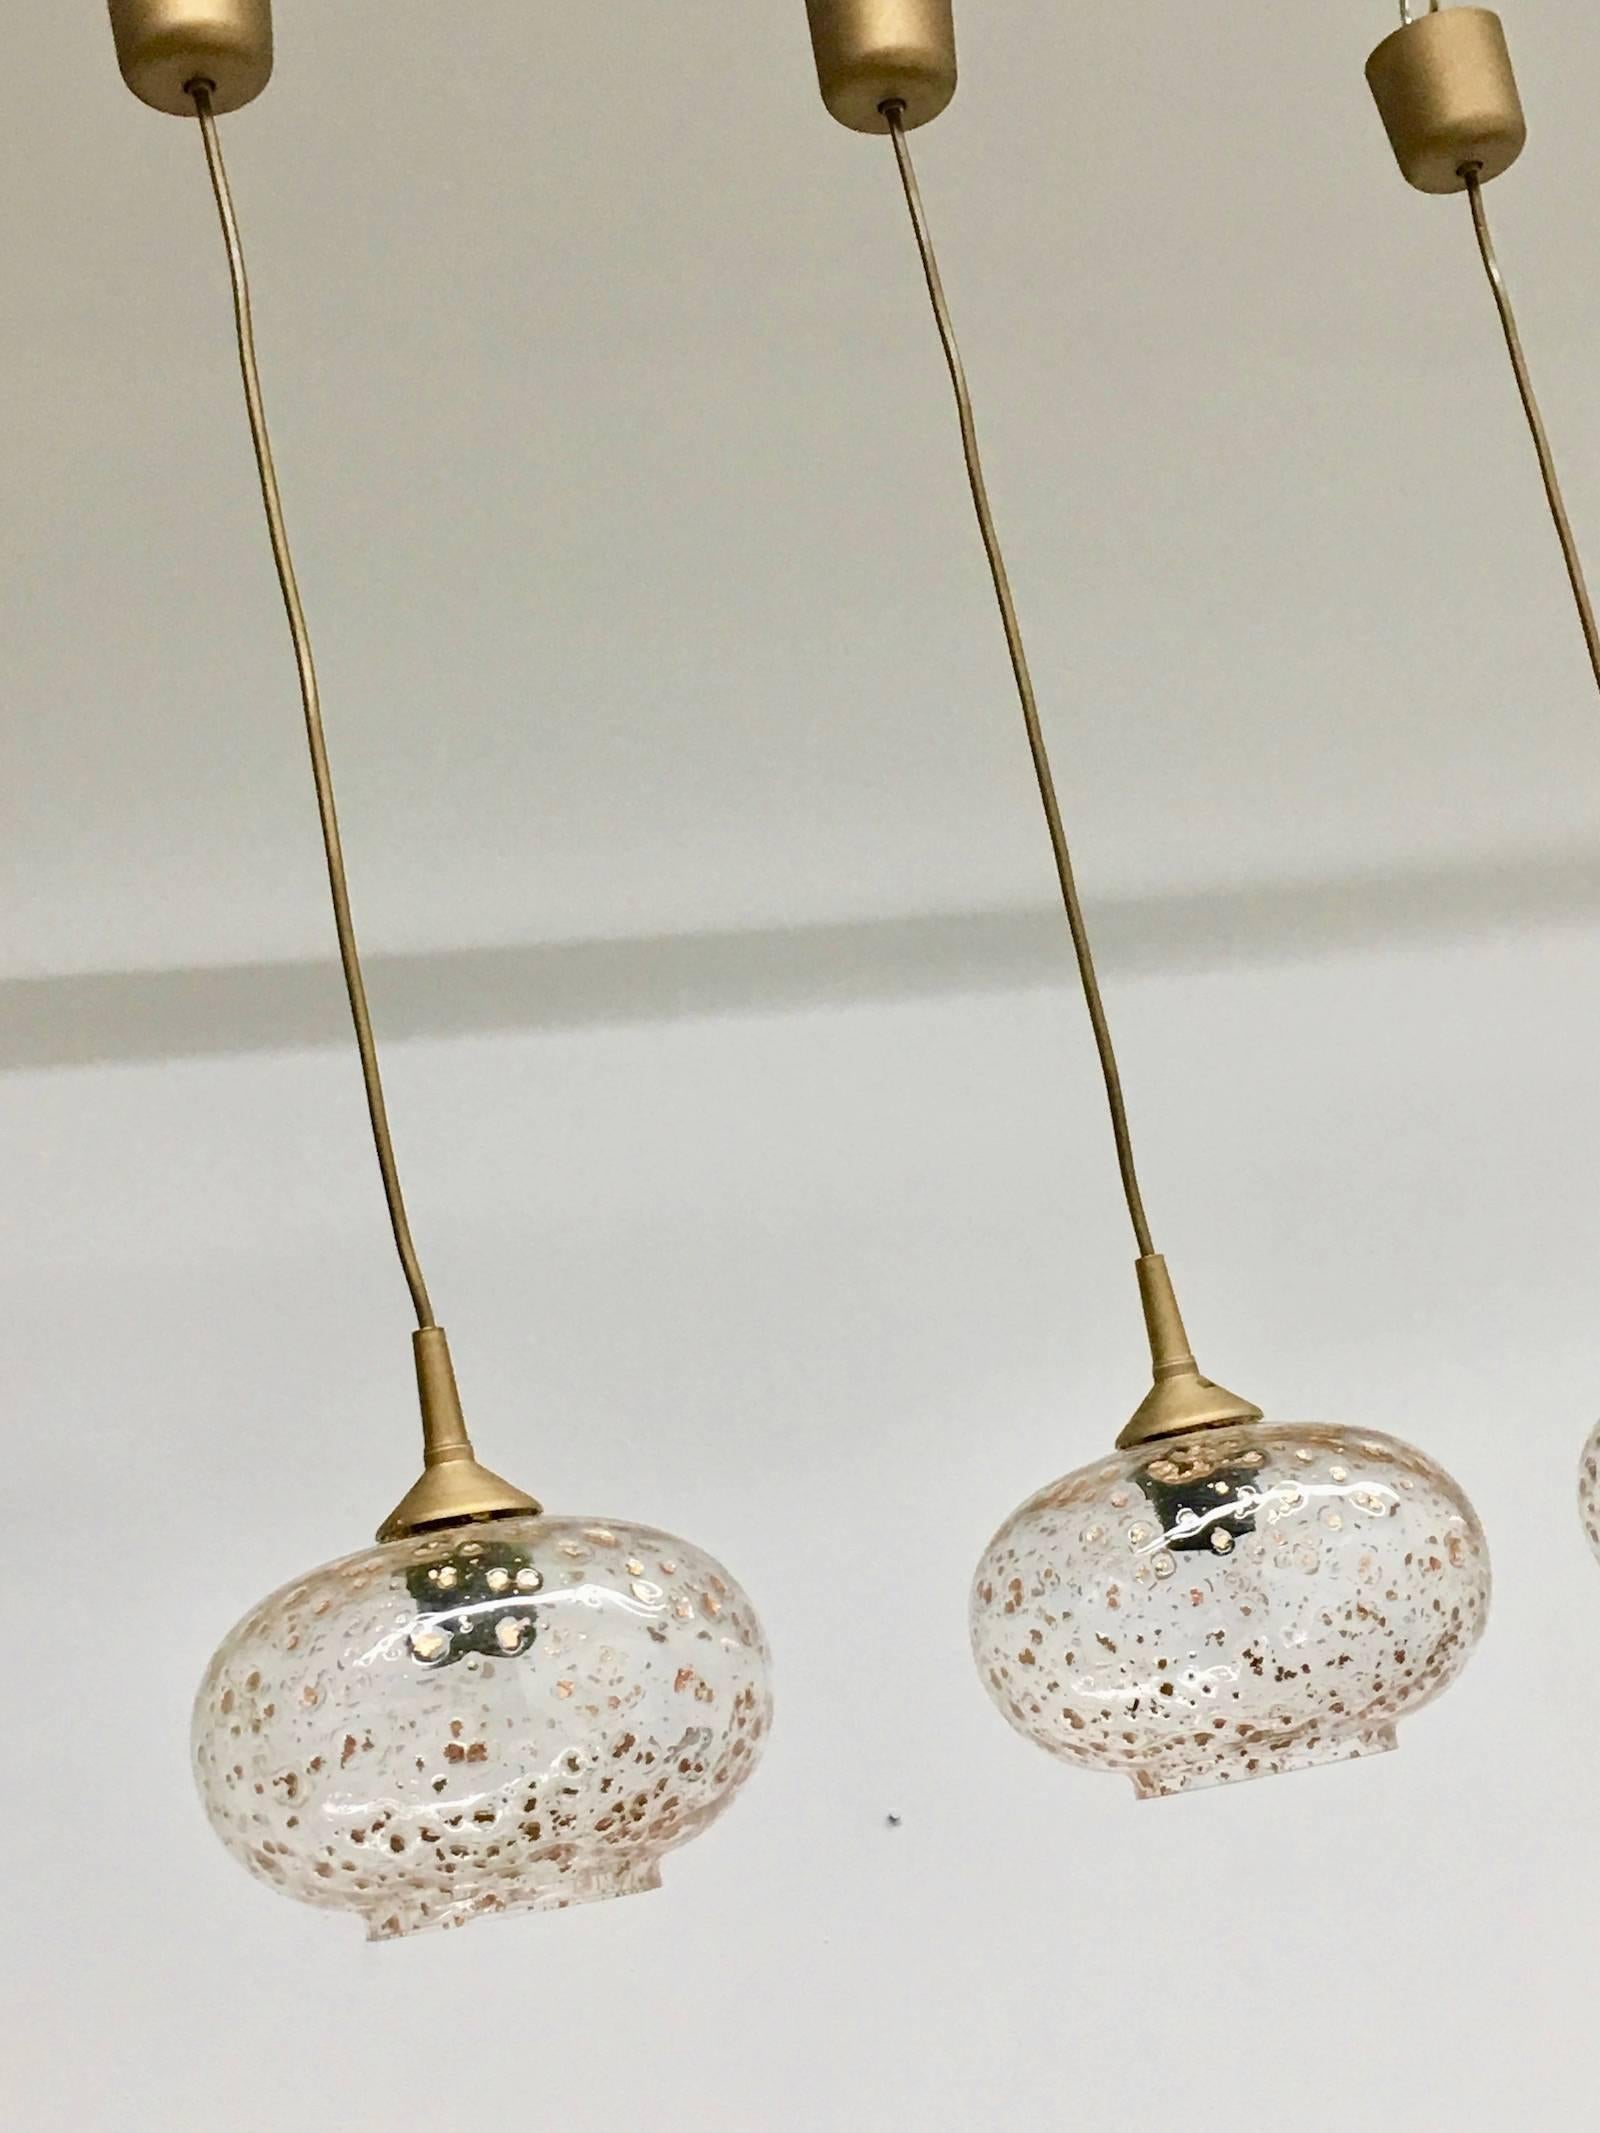 Lot of five beautiful pendant lights, manufactured by Doria Leuchten in the 1960s. Each is made of Plastic hardware with one light source and a gold flaked glass on it. Each is approximate 30 inch in total high. The glass is approximate 5.25 inch